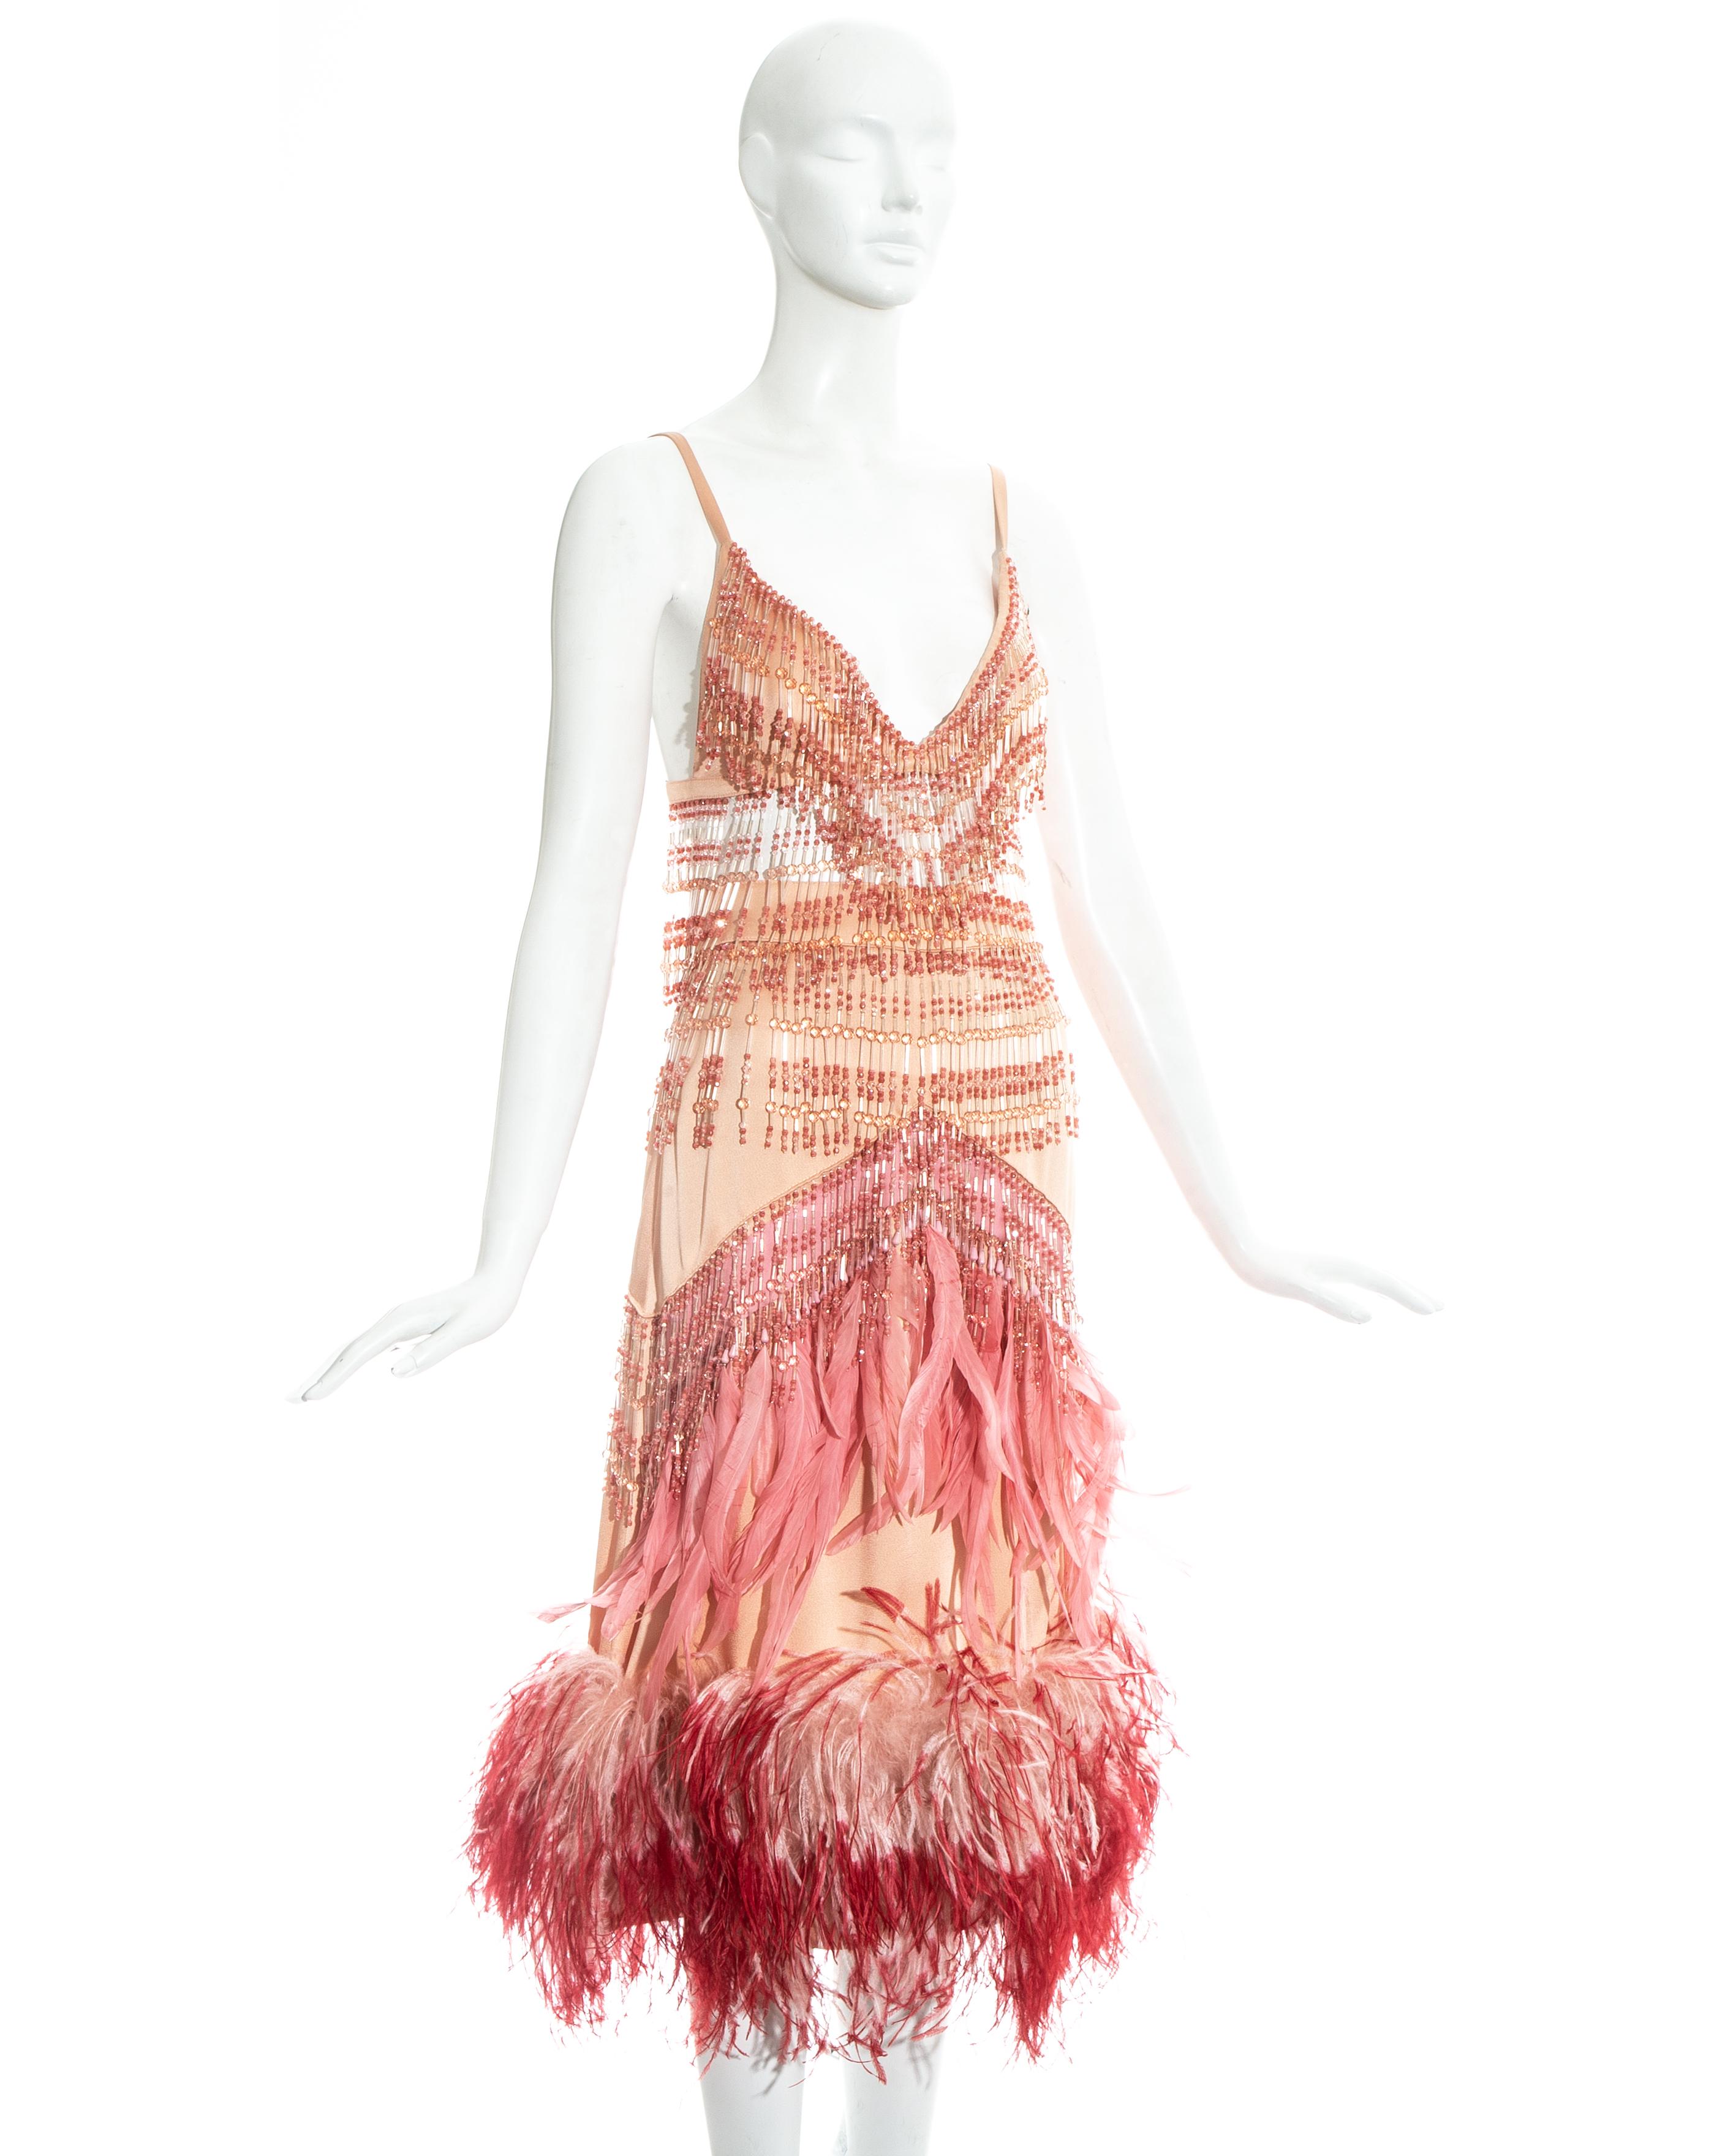 Prada runway ensemble; silk salmon skirt and bra top with pink ostrich and turkey feather embellishments and crystal beaded fringe throughout. 

Fall-Winter 2017